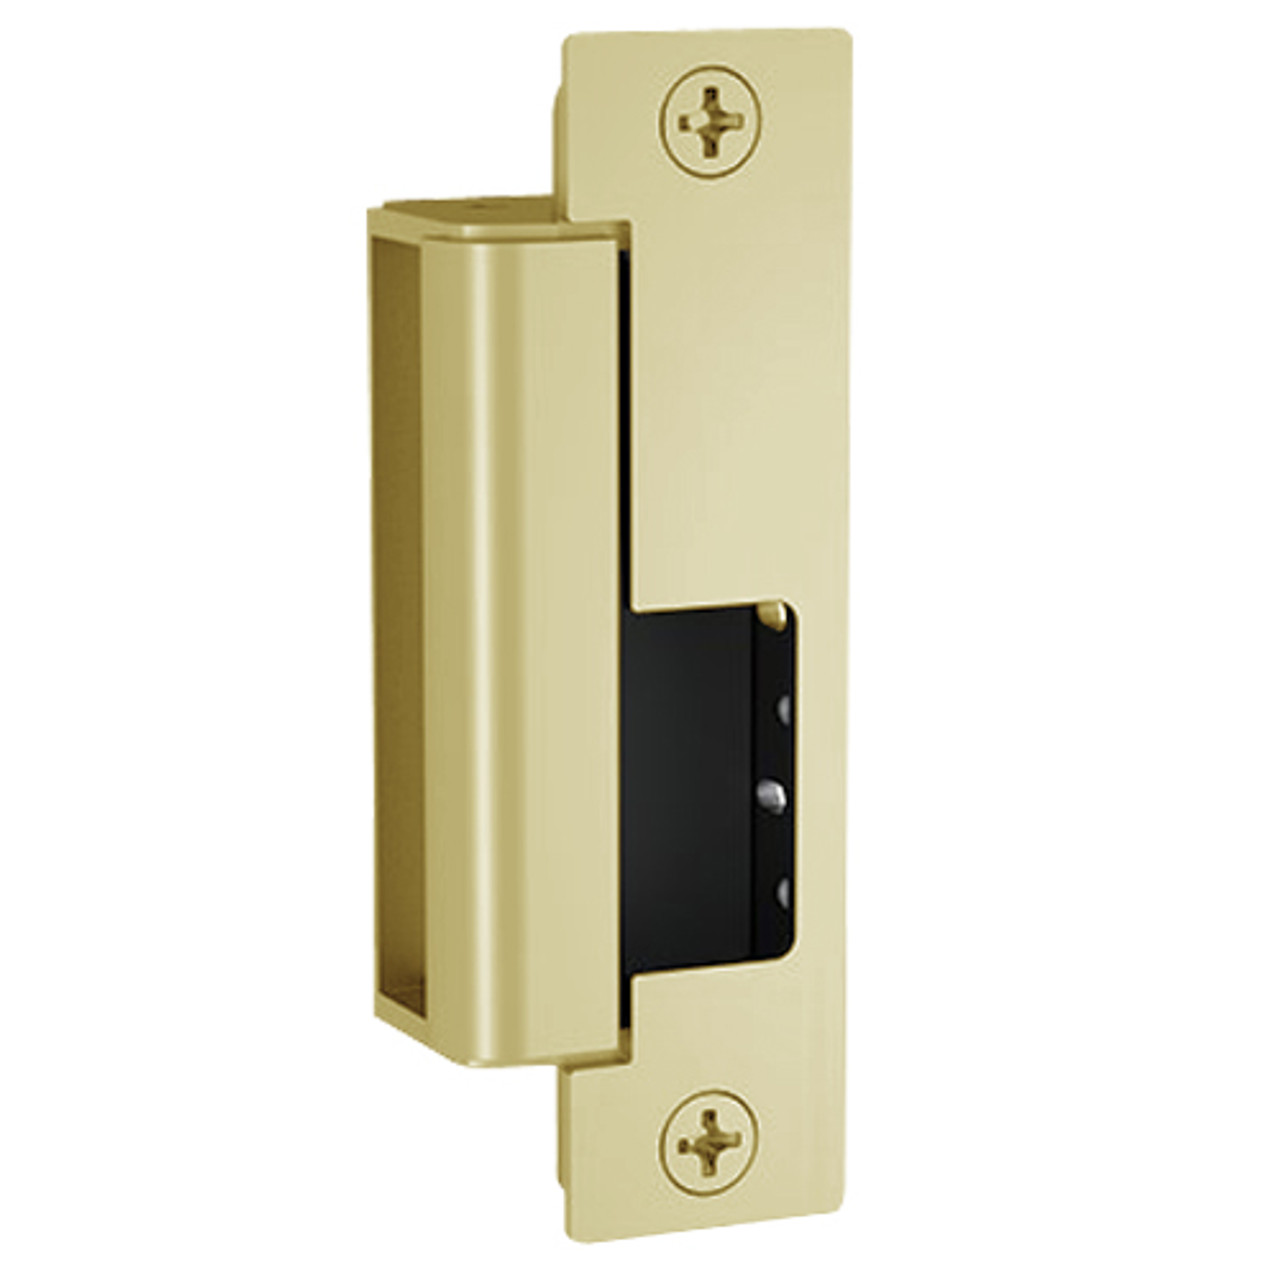 1500C-DLMS-606 Hes 1500 Series Heavy Duty Complete Electric Strike with Dual Lock Monitor and Strike Monitor in Satin Brass